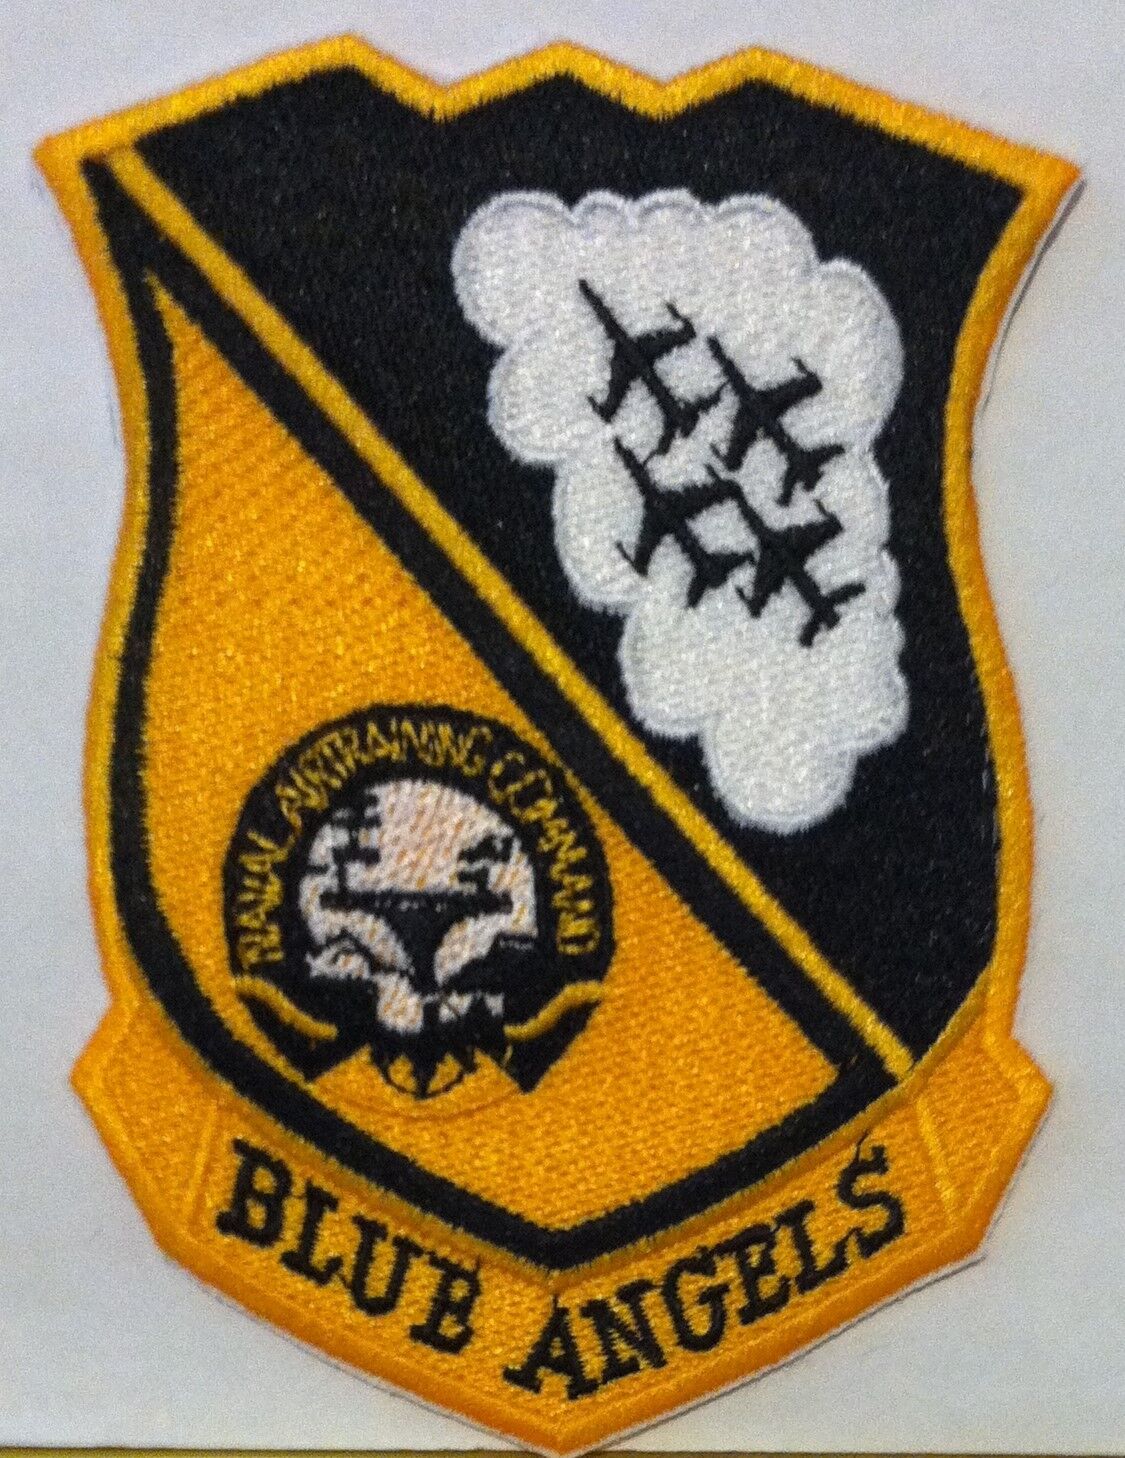 BLUE ANGELS SEAL US NAVY AIR TRAINING COMMAND Patch W/ VELCRO® Brand Fastener #1